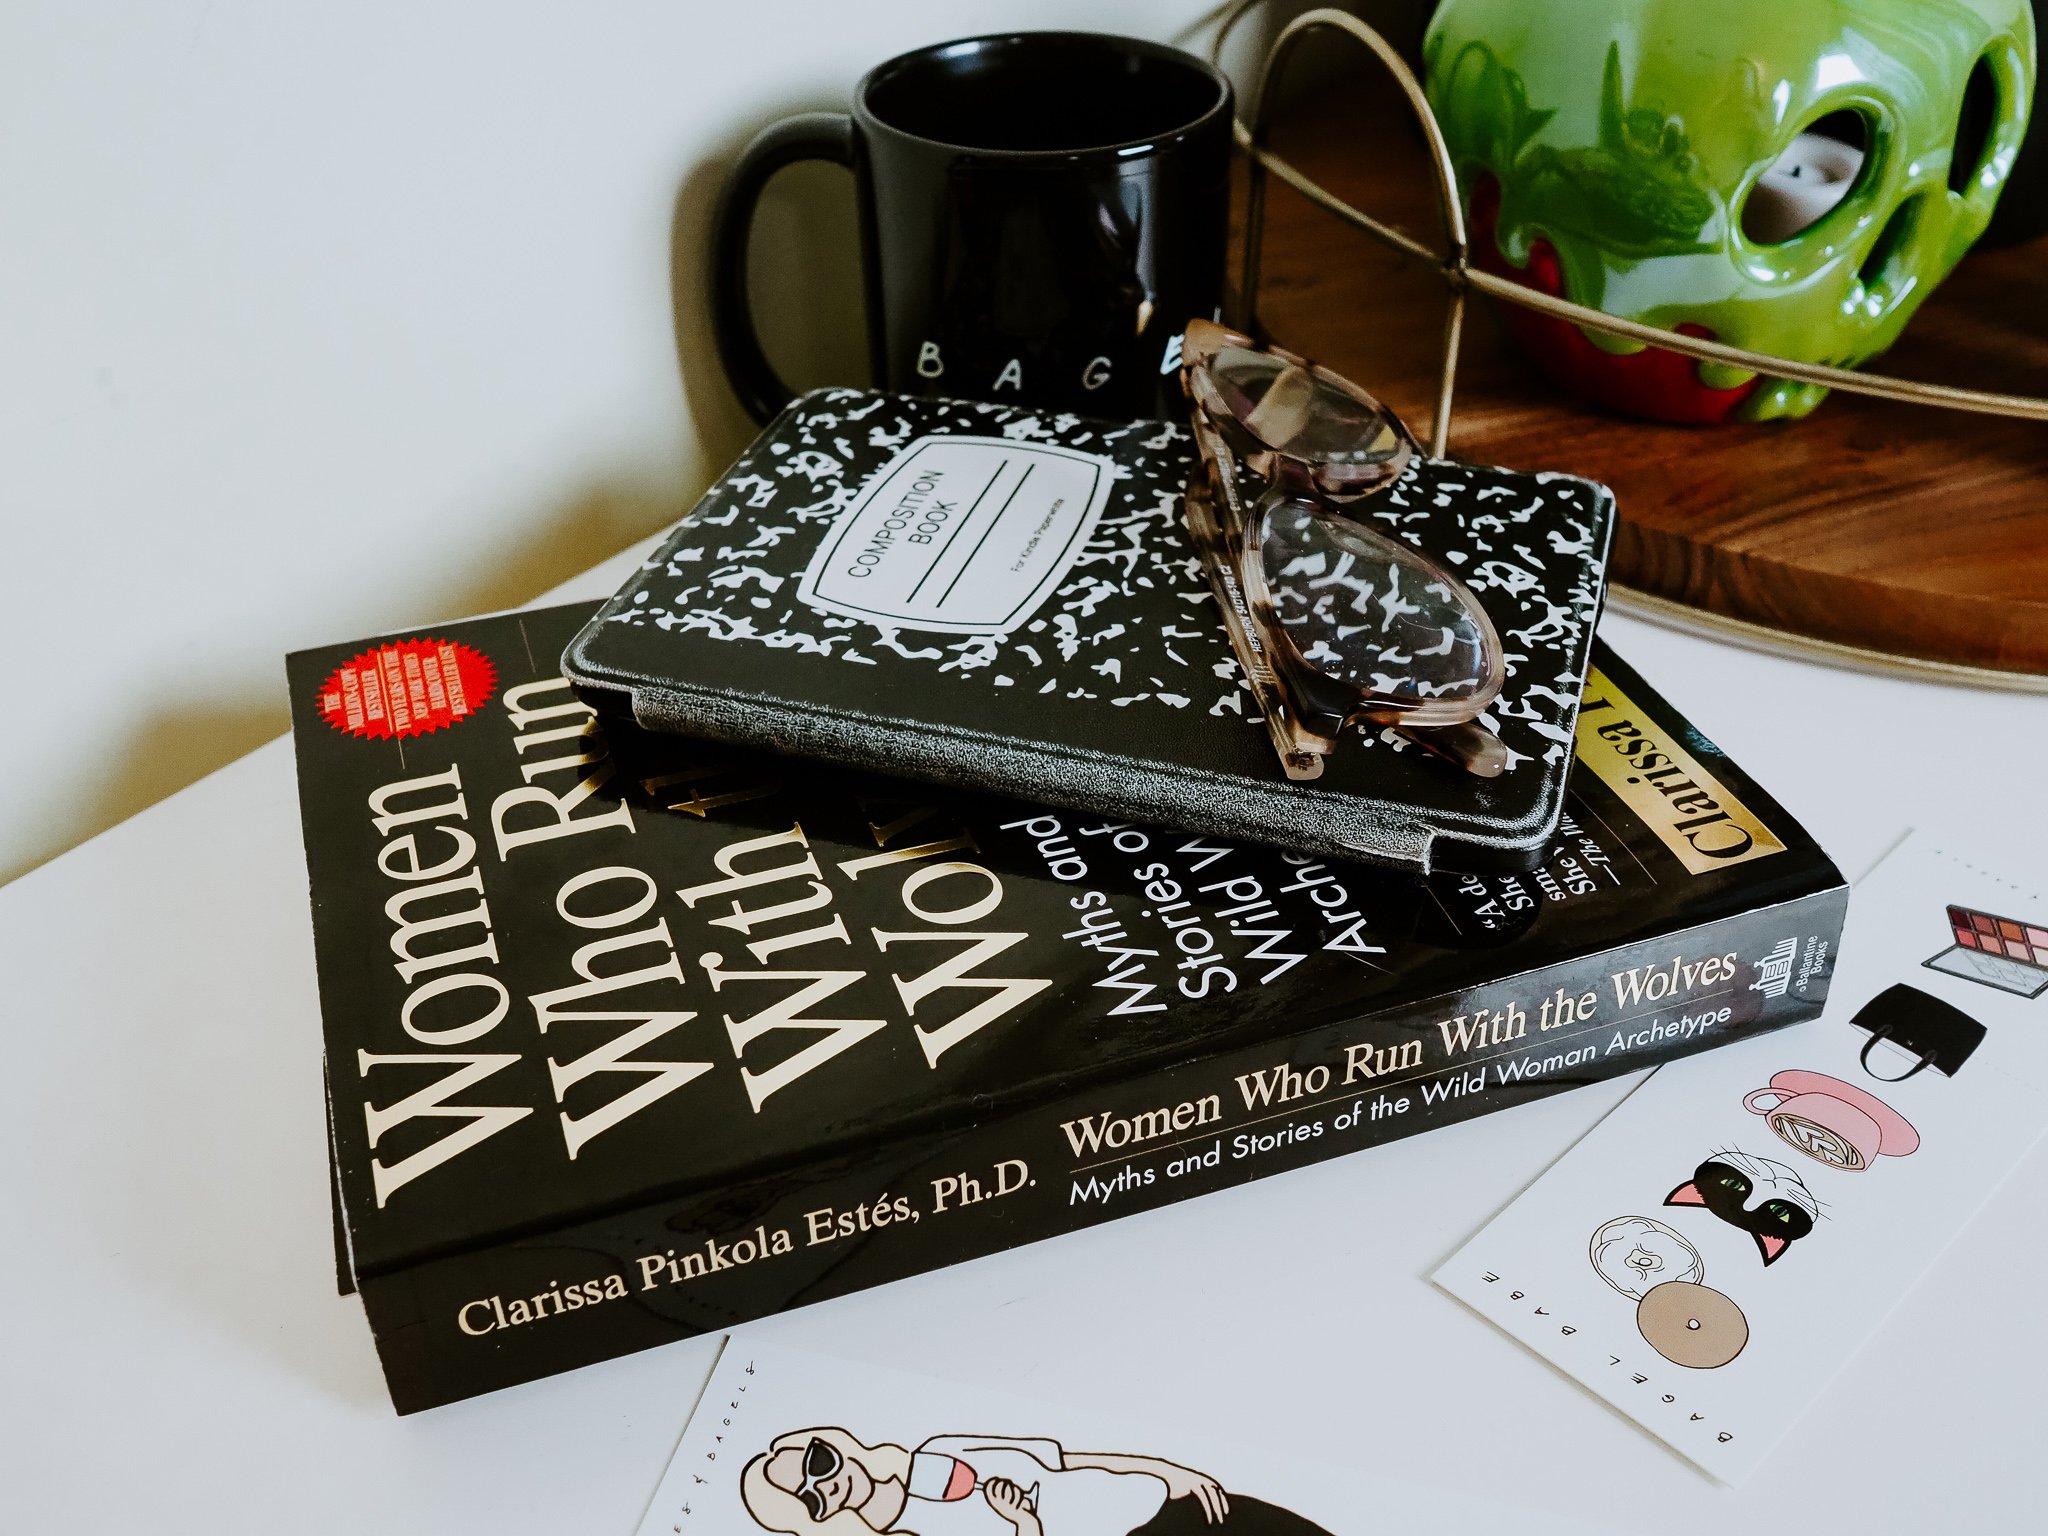 Lifestyle blogger Kelsey from Blondes & Bagels recommends the best books to read in 2020!